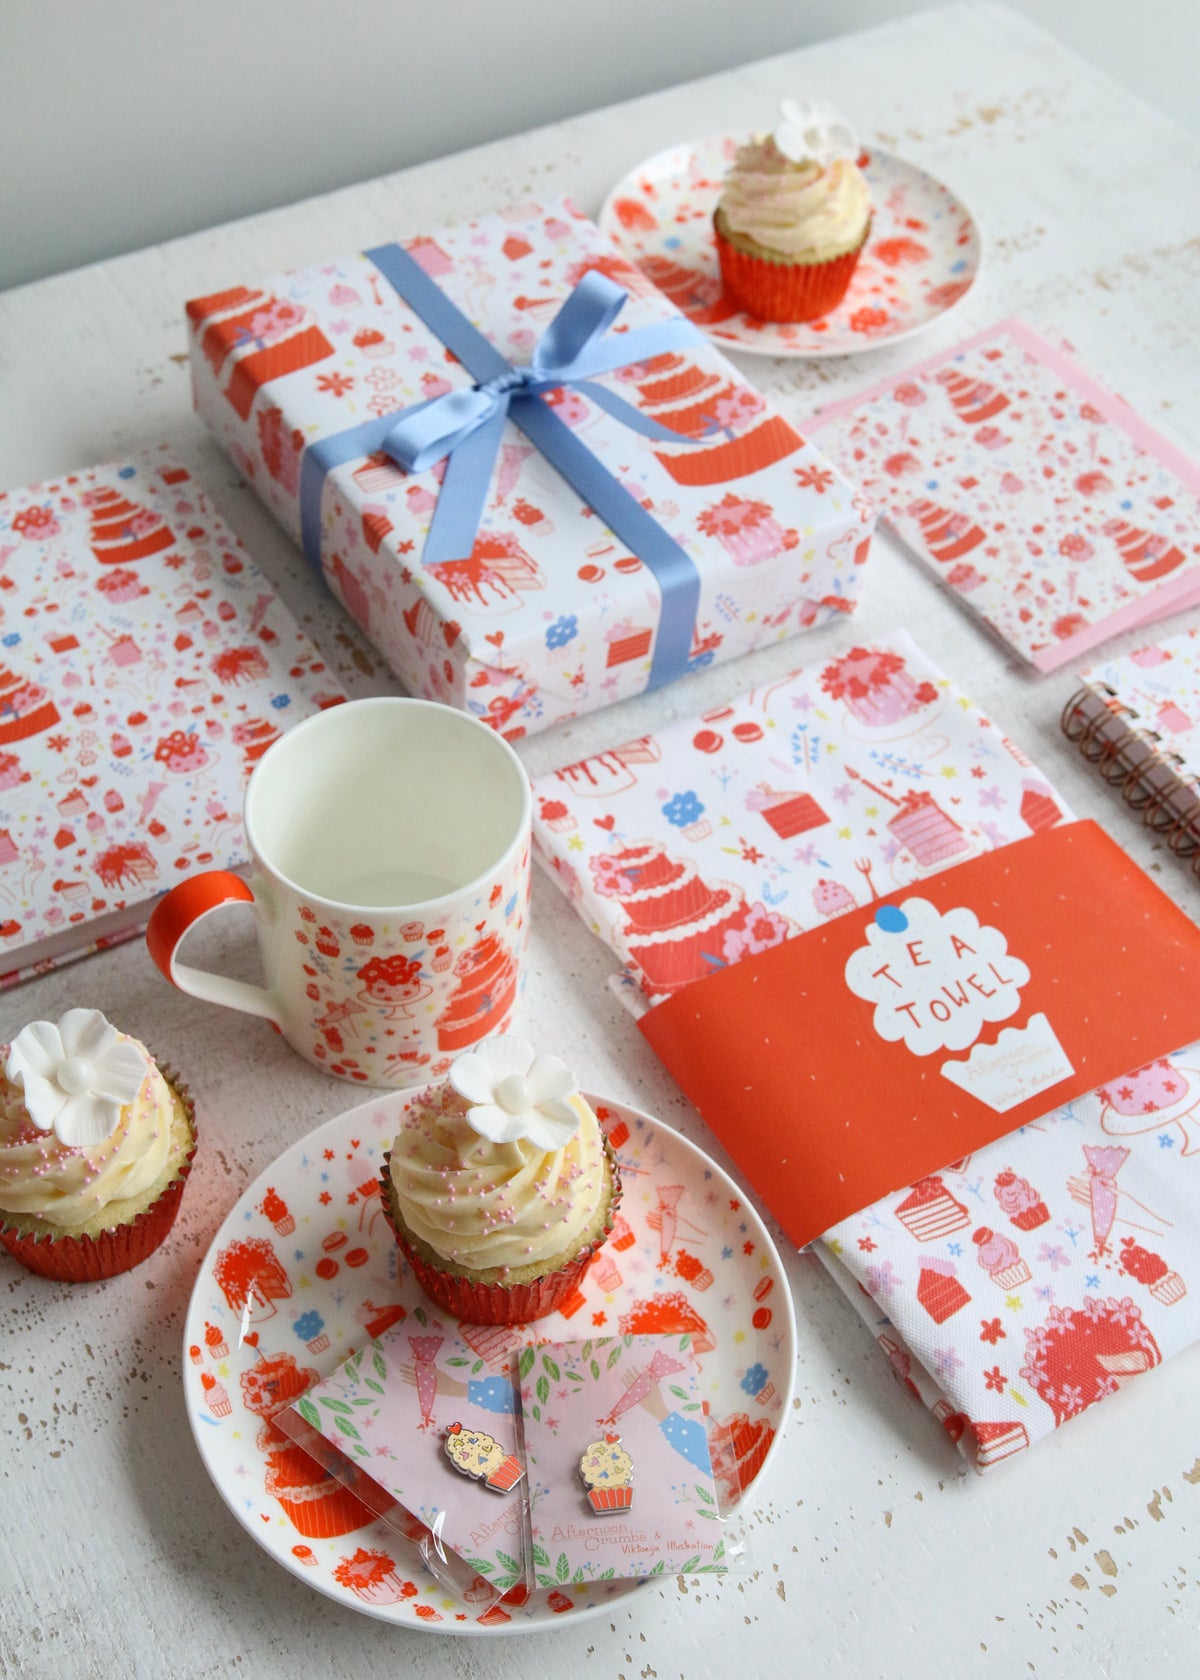 'Spreading Sweetness' Baking Gift Collection